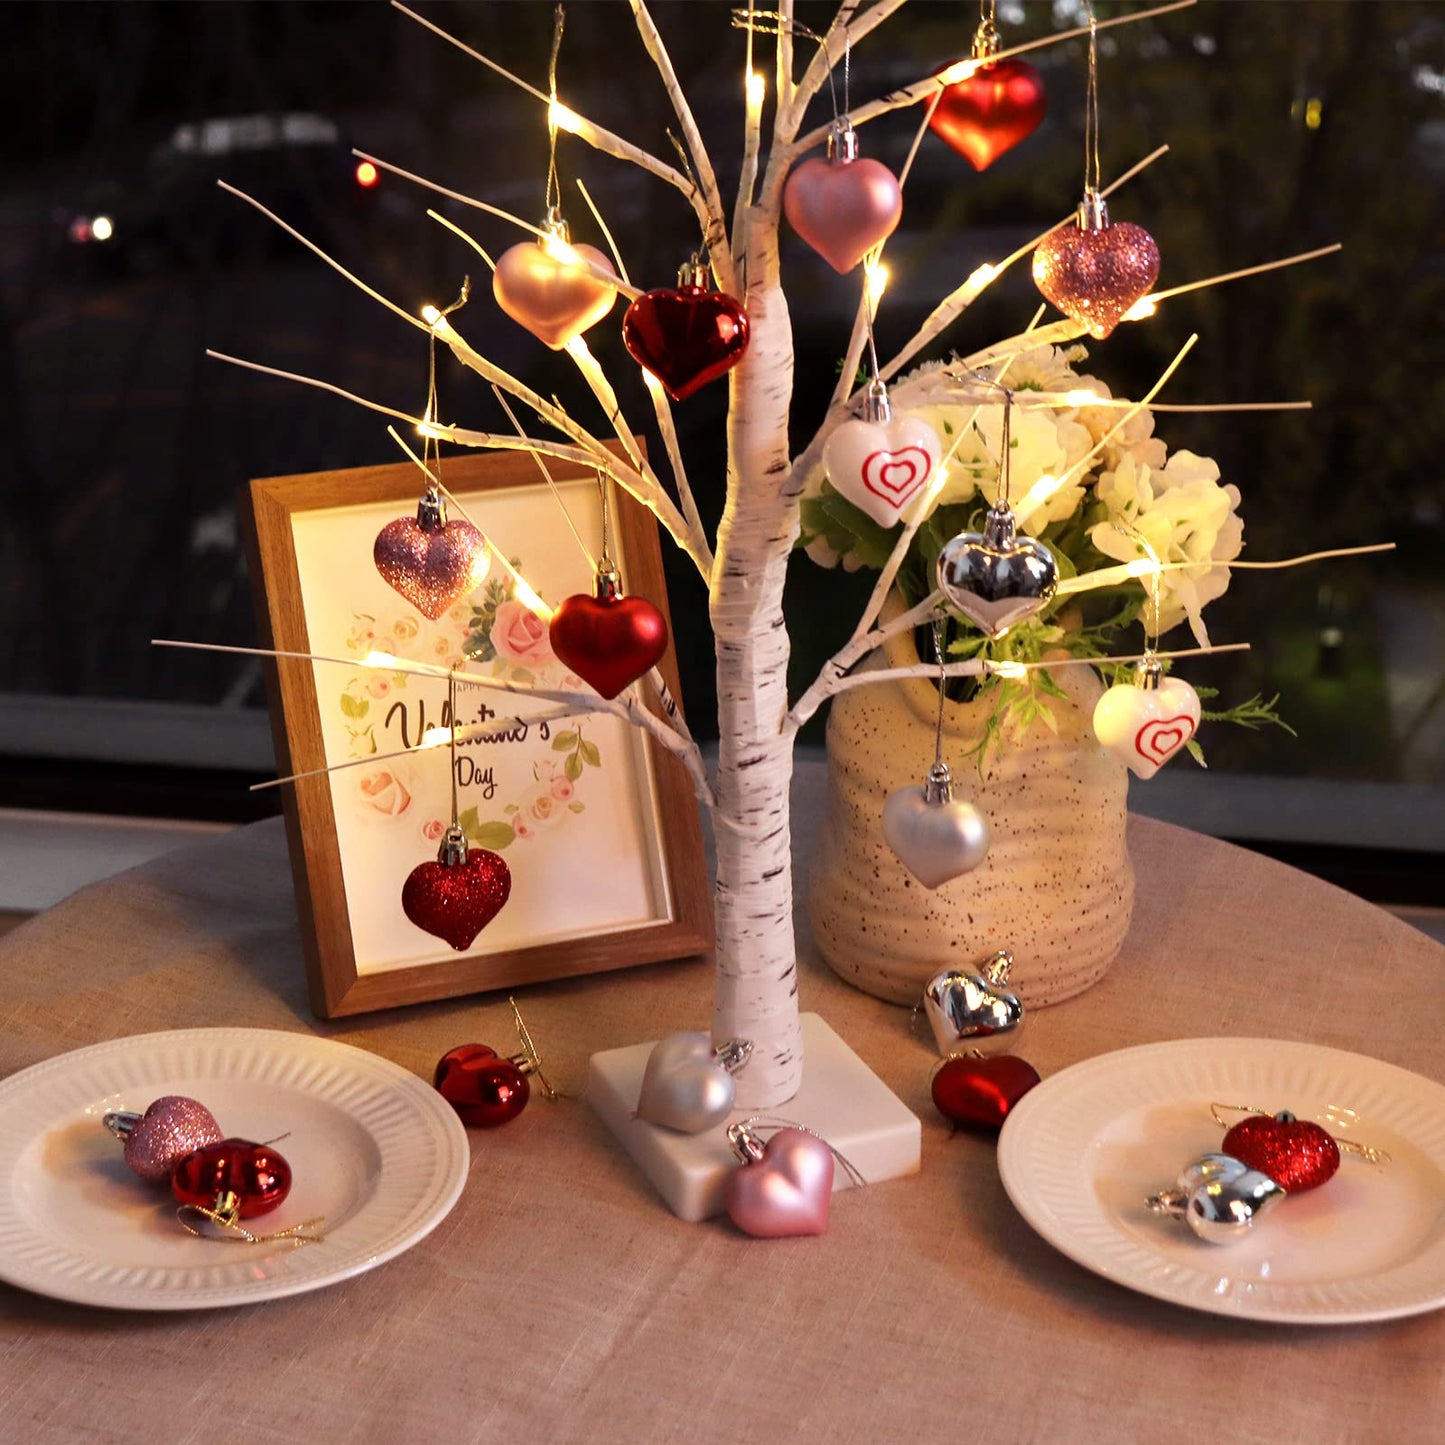 Valentines Day Decor 23.2" Lighted Birch Tree with 24pcs Heart Tree Ornaments, Valentine Table Decorations White Birch Twig Tree with LED Lights and Cute Heart Decor for The Home Wedding Dinner Gifts